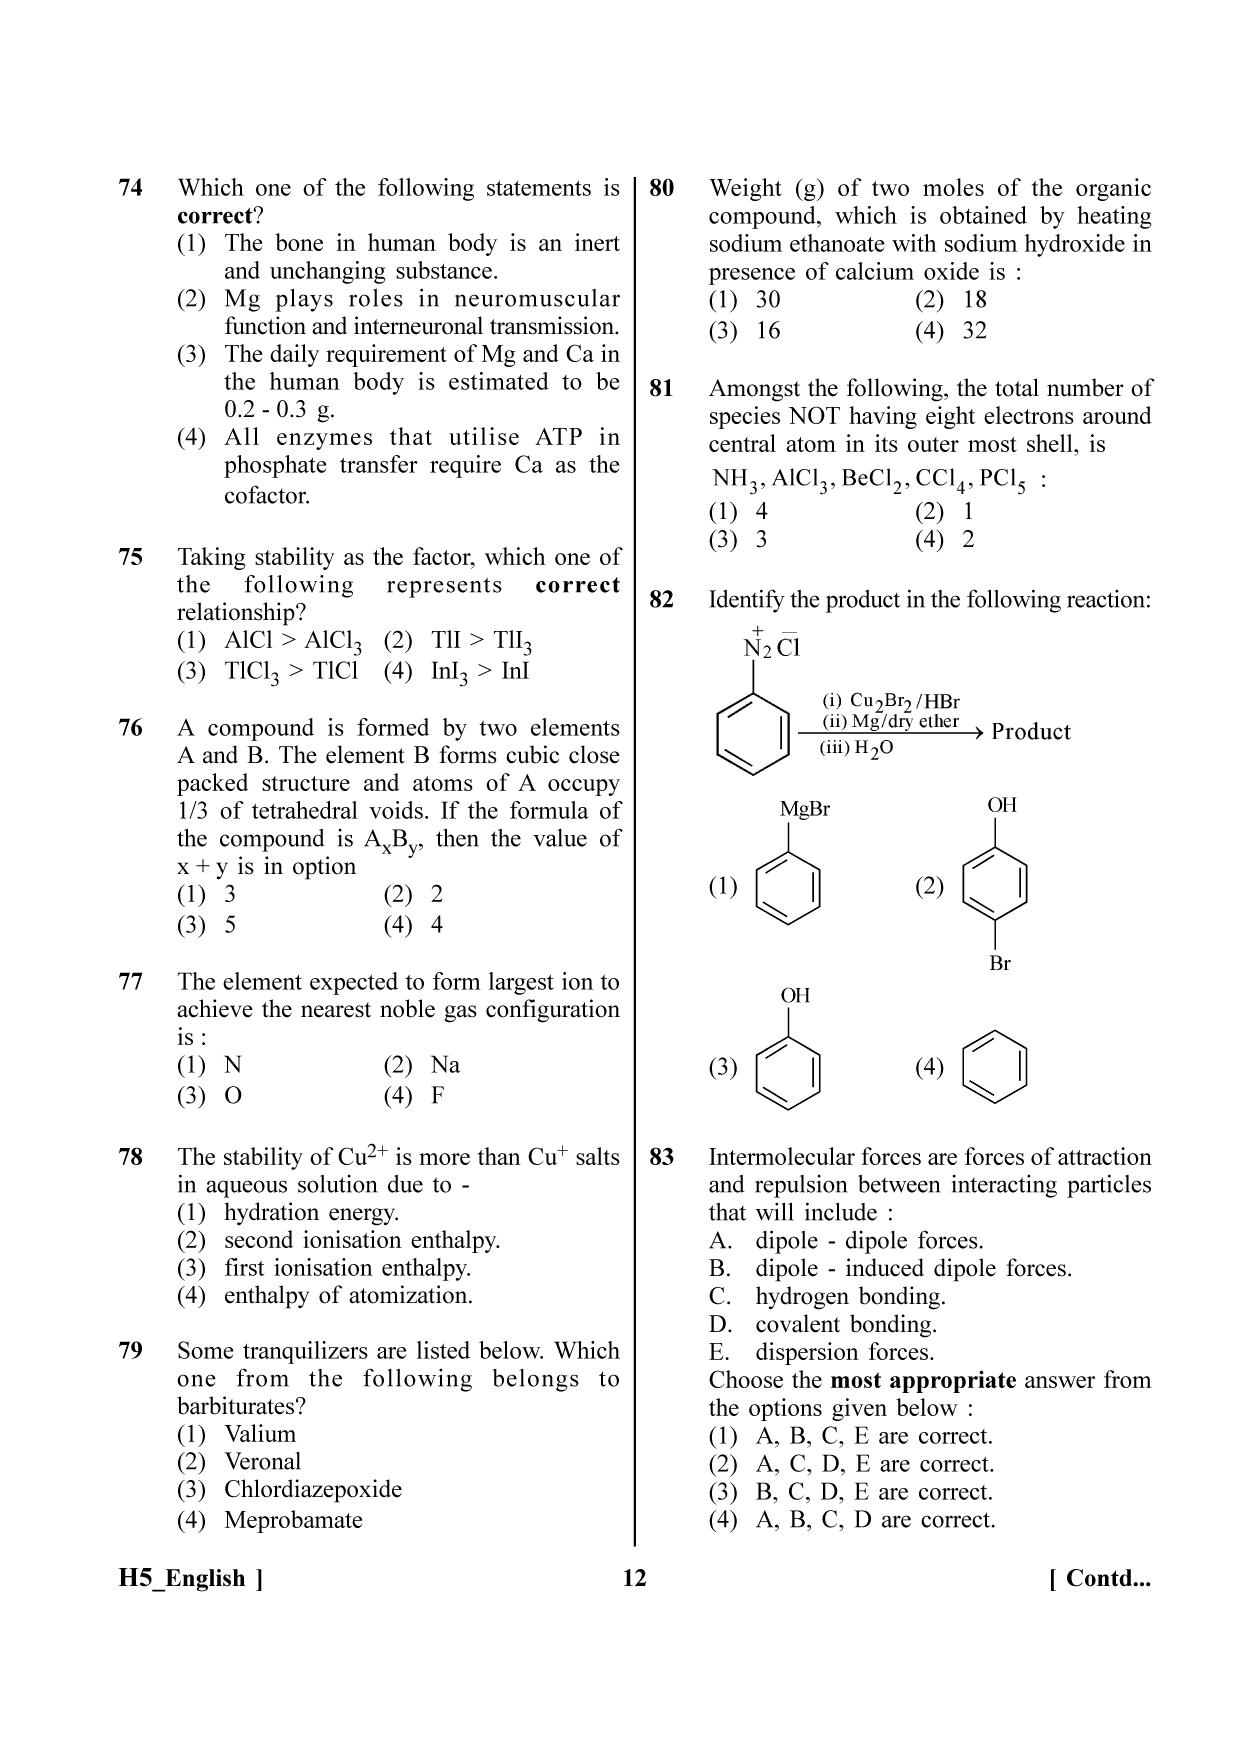 NEET 2023 H5 Question Paper - Page 12